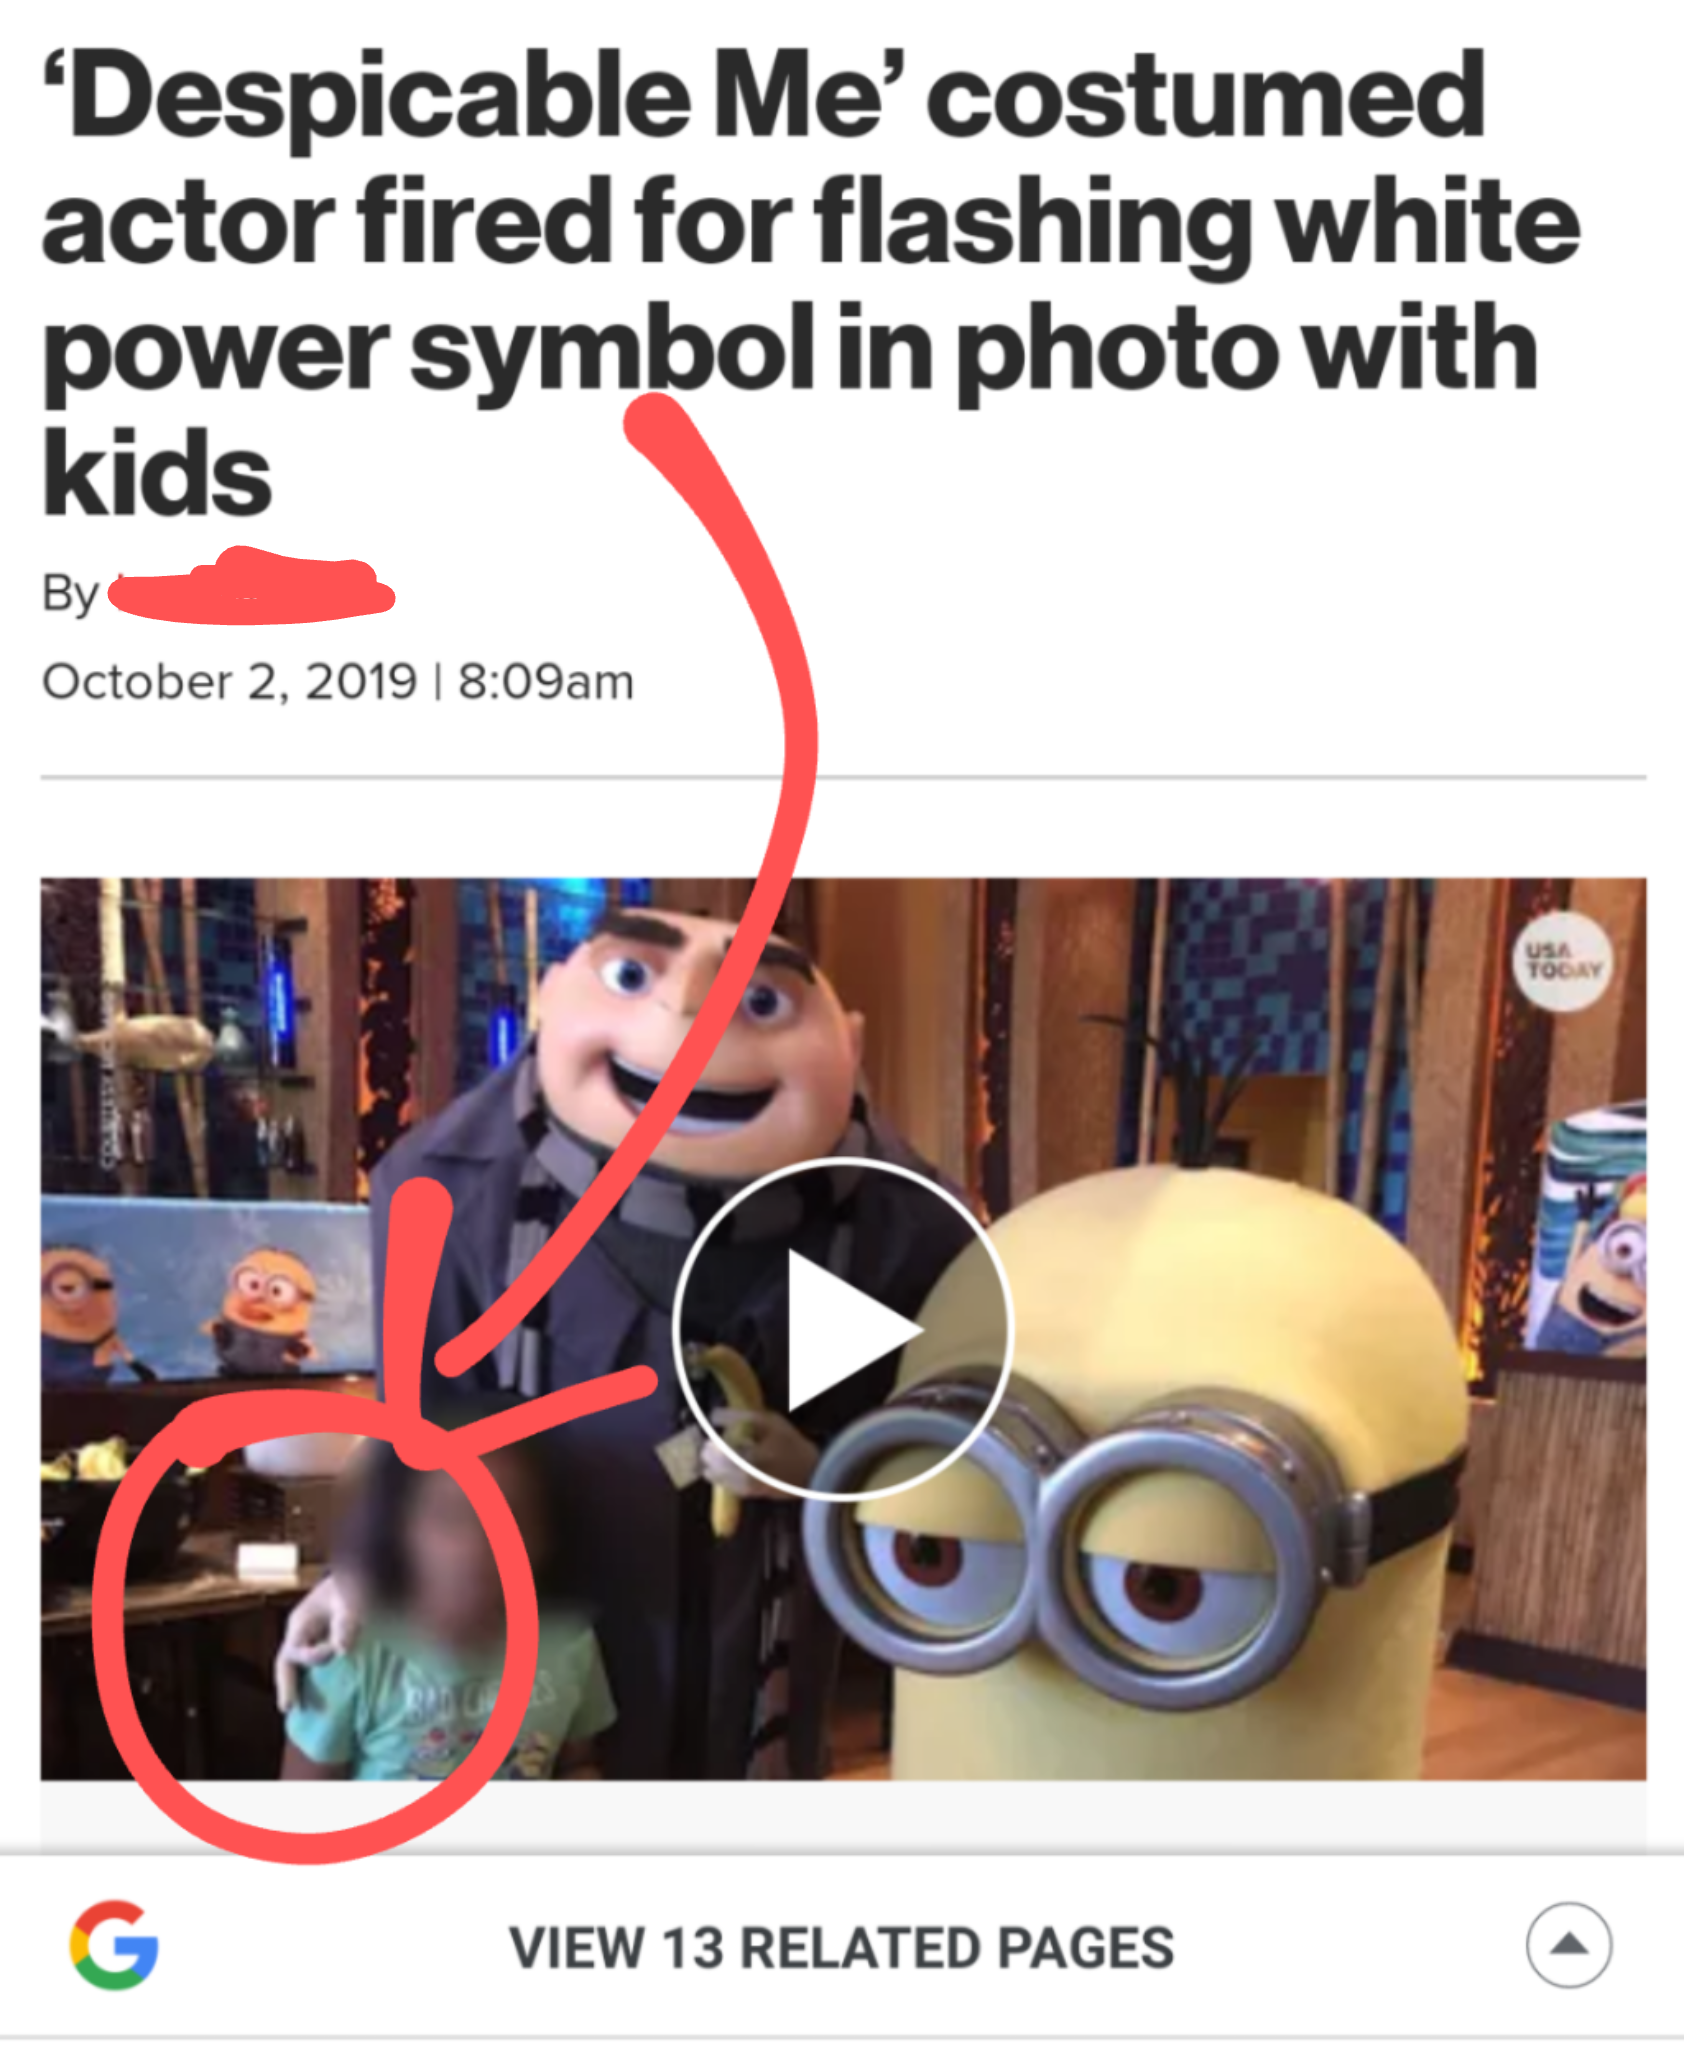 hand gesture gru actor fired - 'Despicable Me' costumed actor fired for flashing white power symbol in photo with kids am View 13 Related Pages